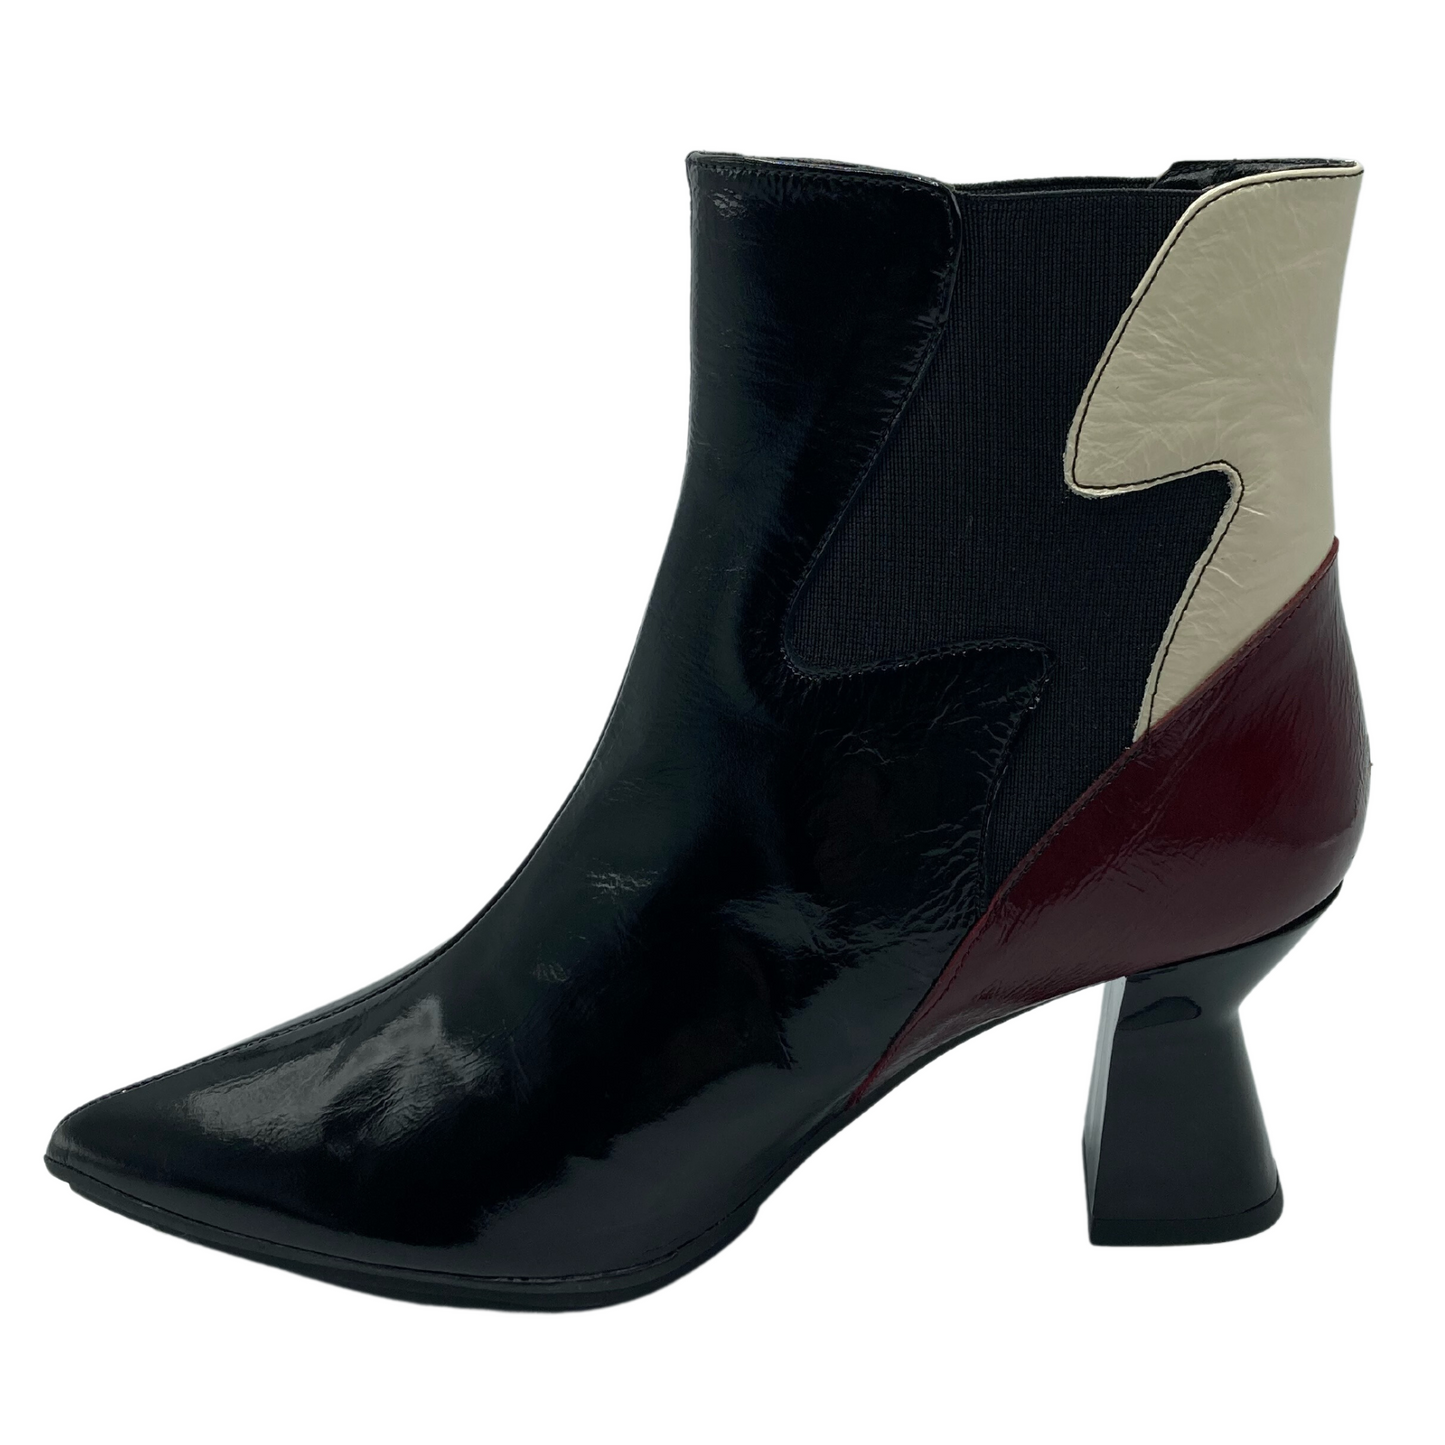 Left facing view of leather ankle boot with flared heel and pointed toe